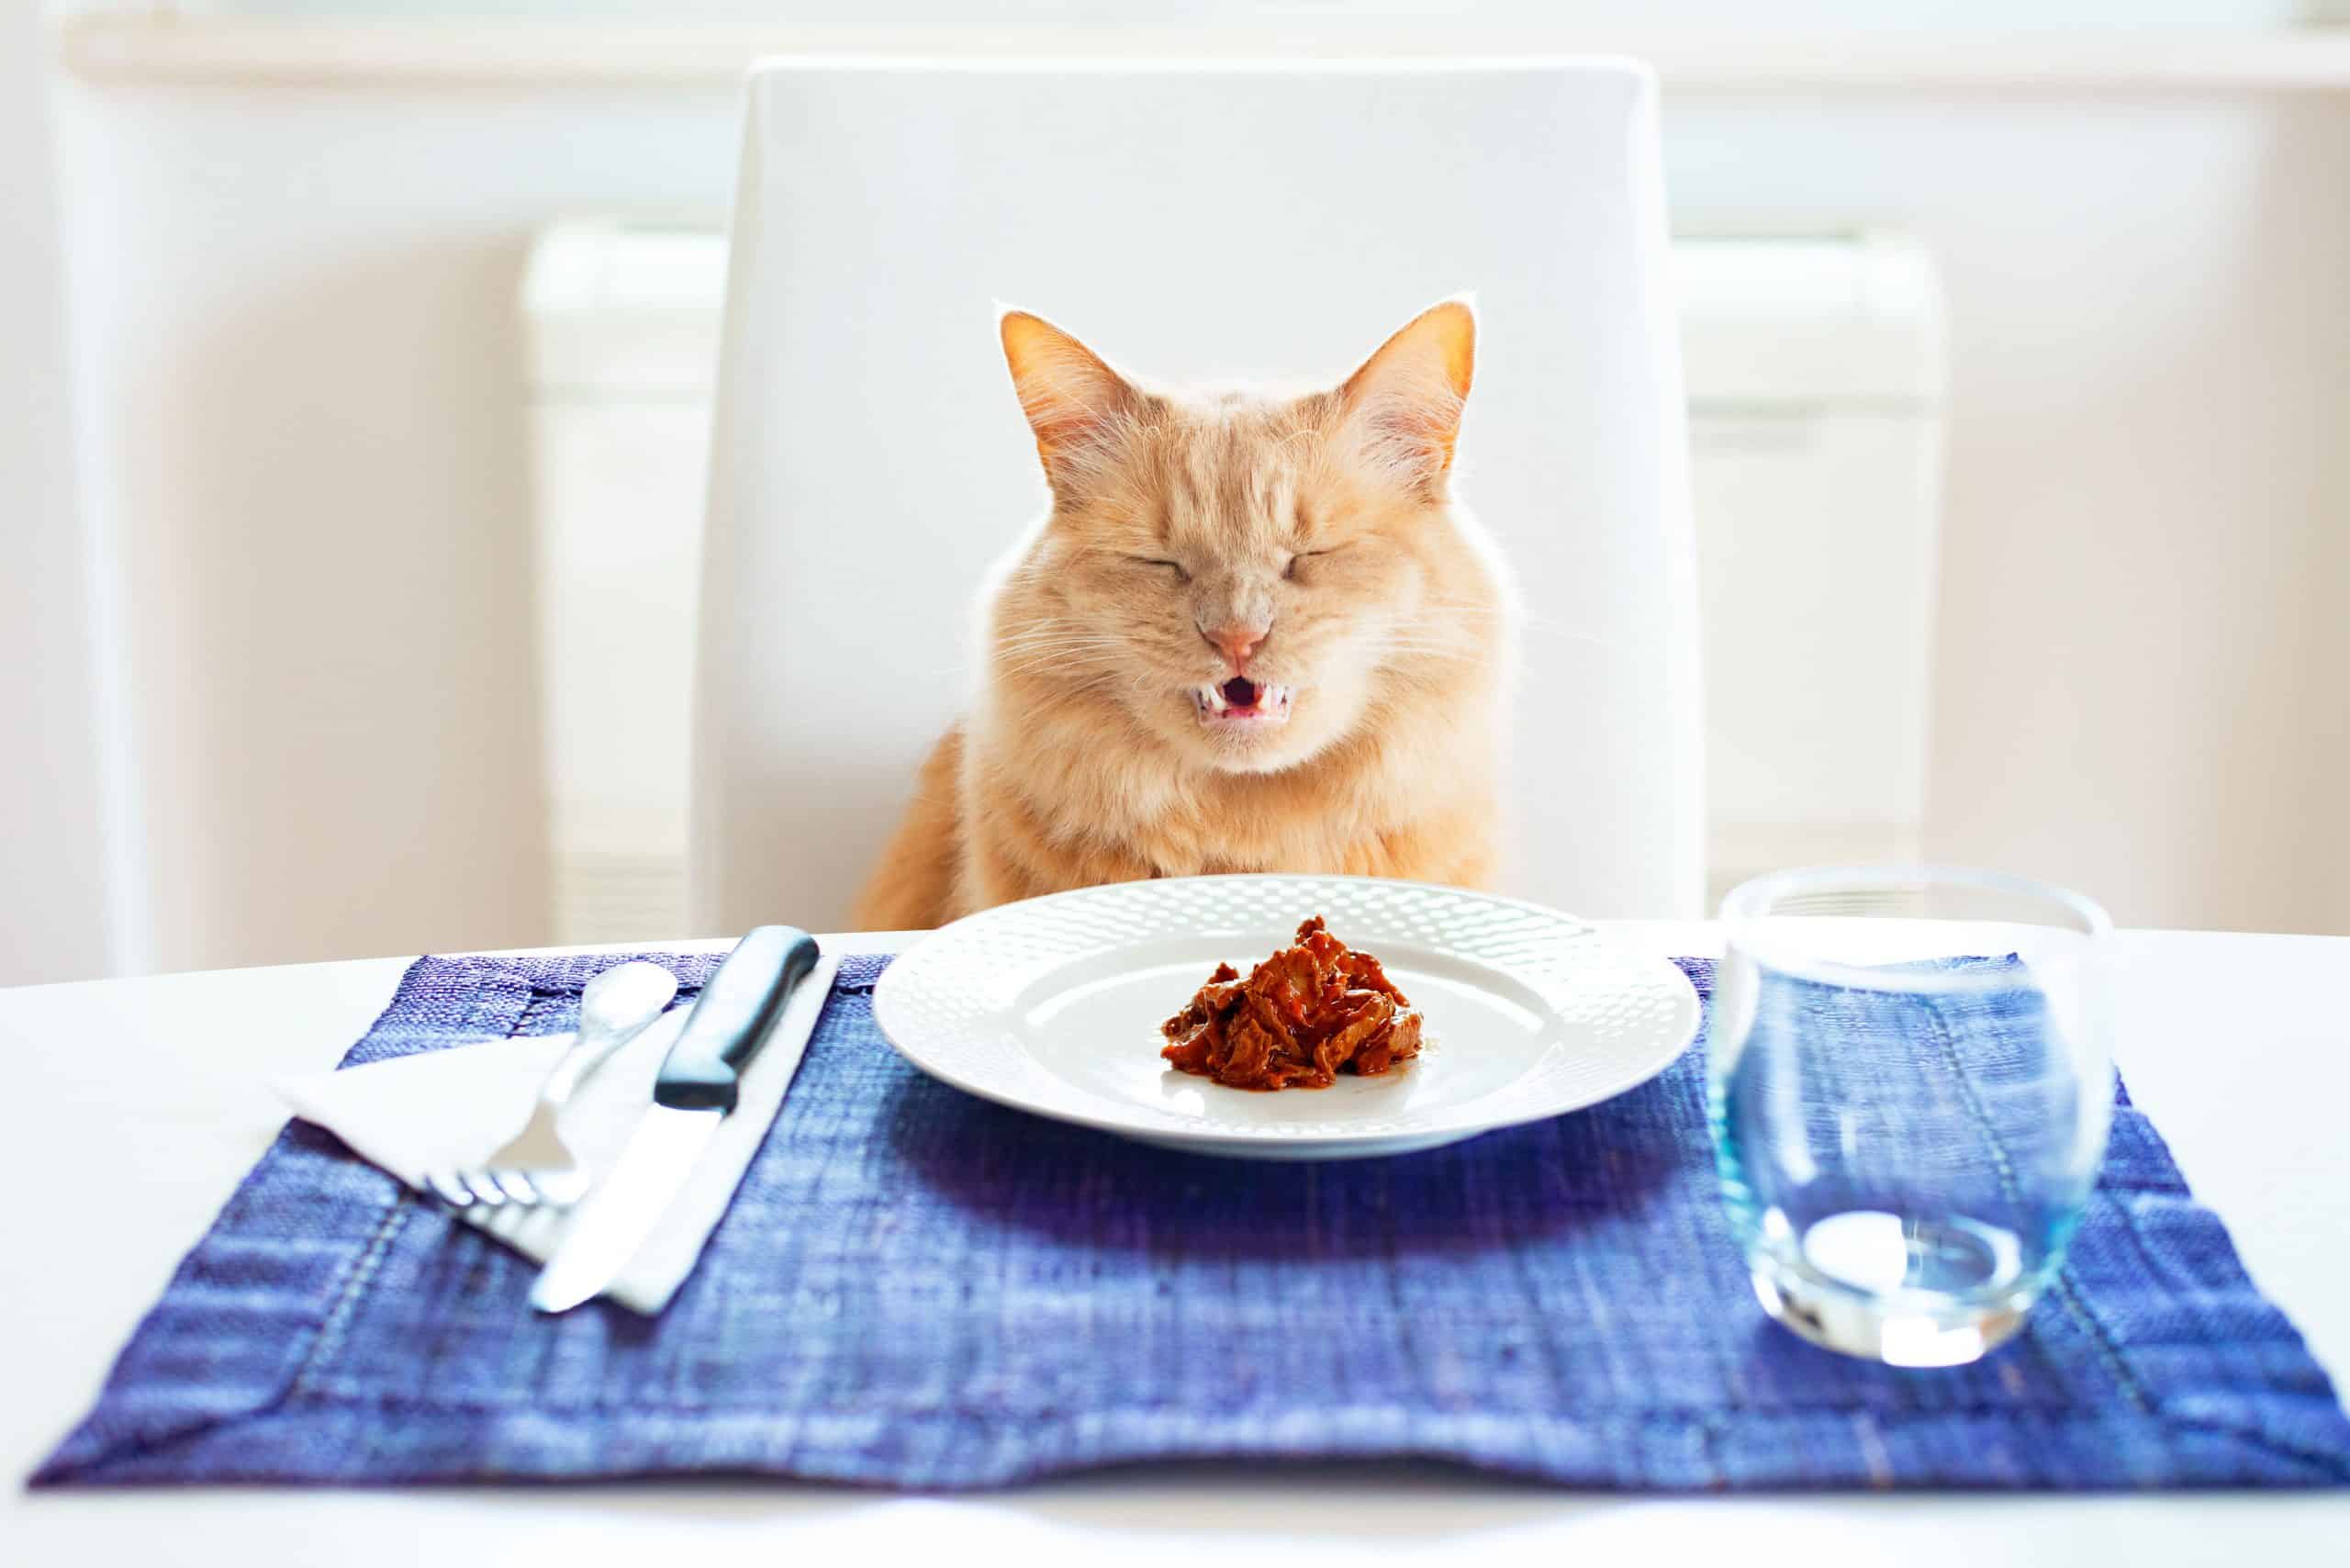 Cat with a funny angry expression there is wet food in the plate sitting in front on a table set like a human